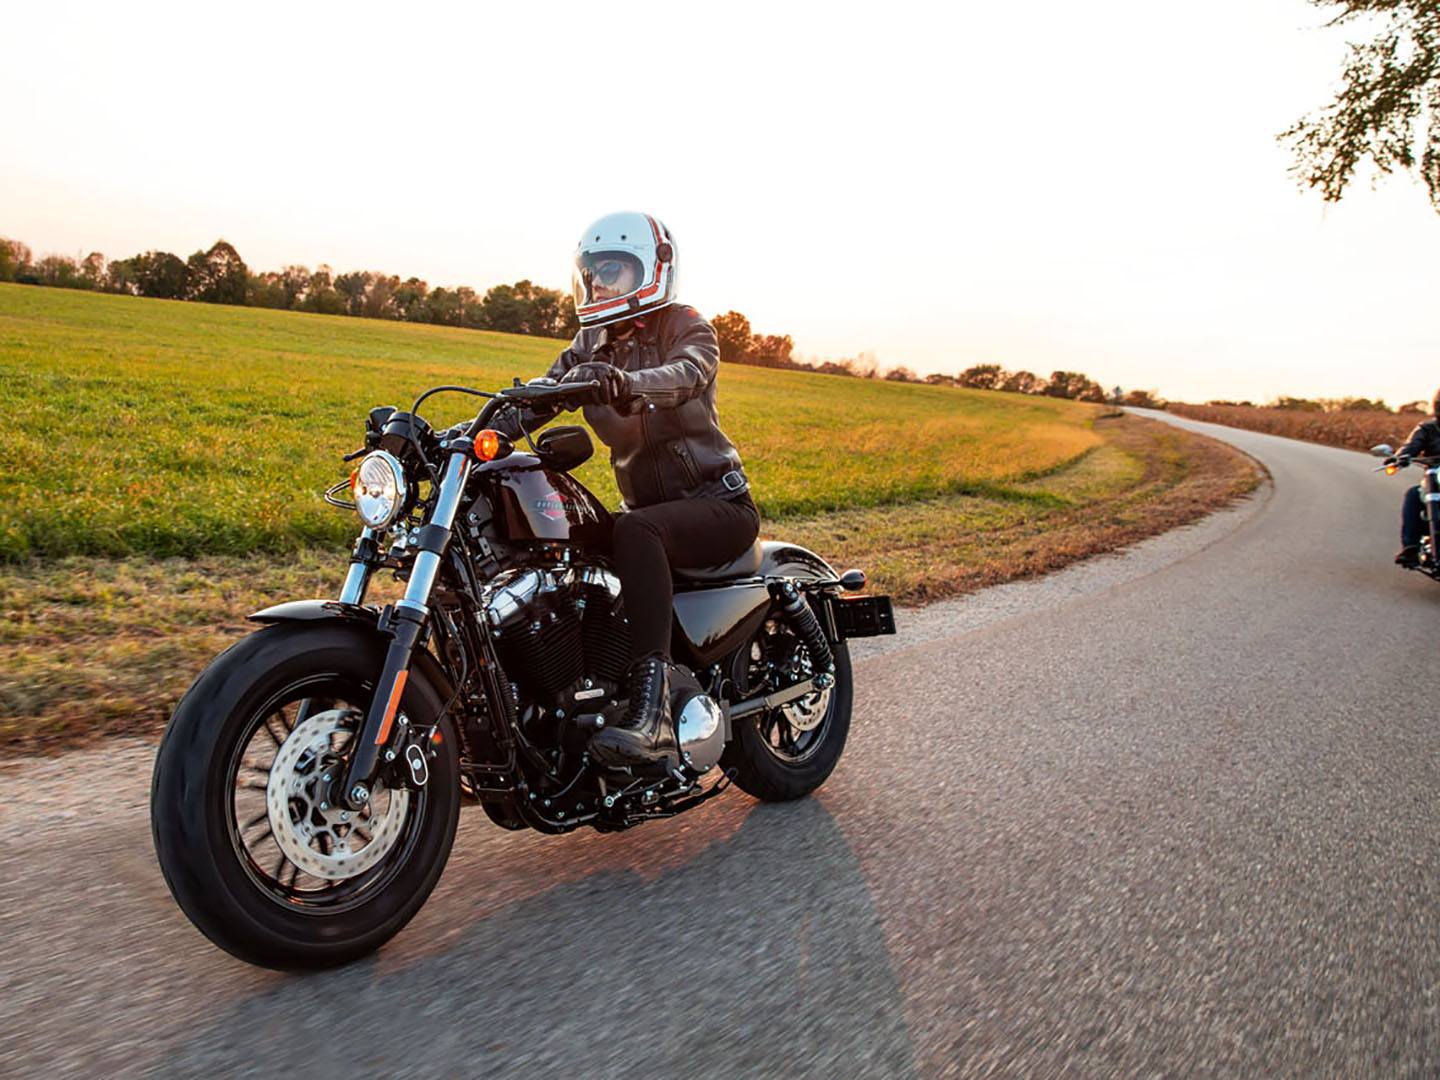 2021 Harley-Davidson Forty-Eight® in Dumfries, Virginia - Photo 16